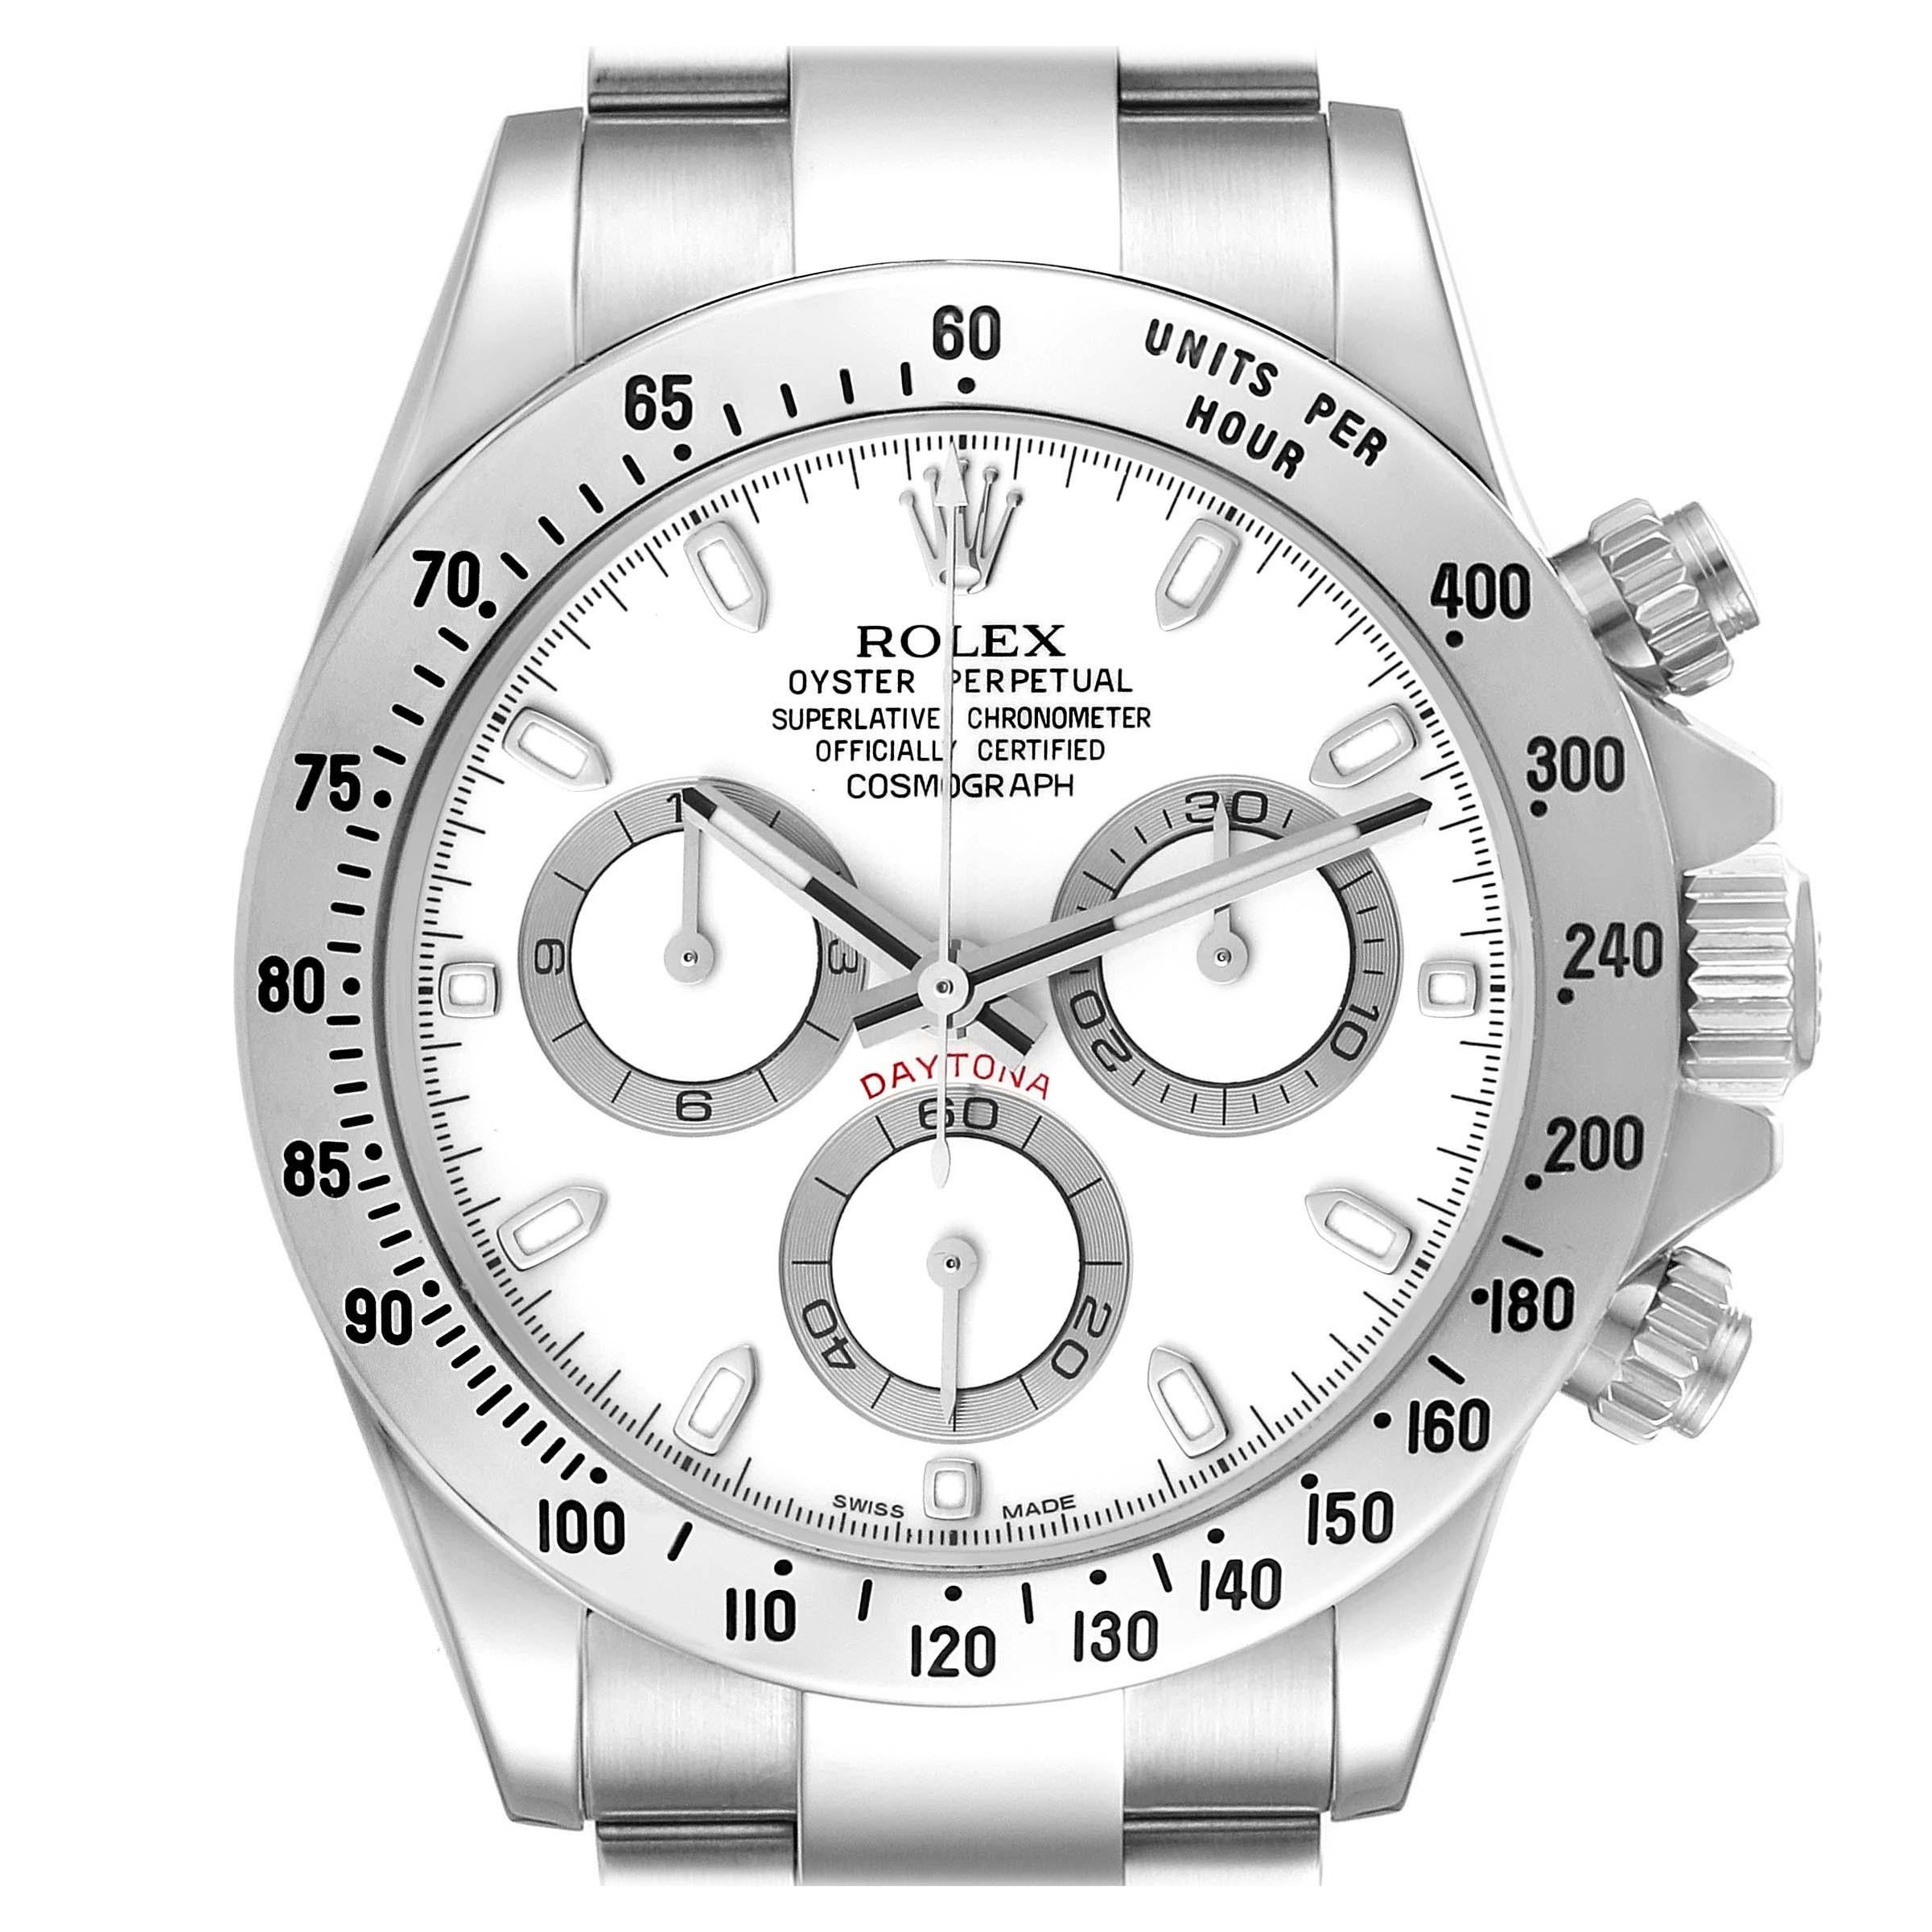 Rolex Daytona White Dial Chronograph Steel Mens Watch 116520 For Sale